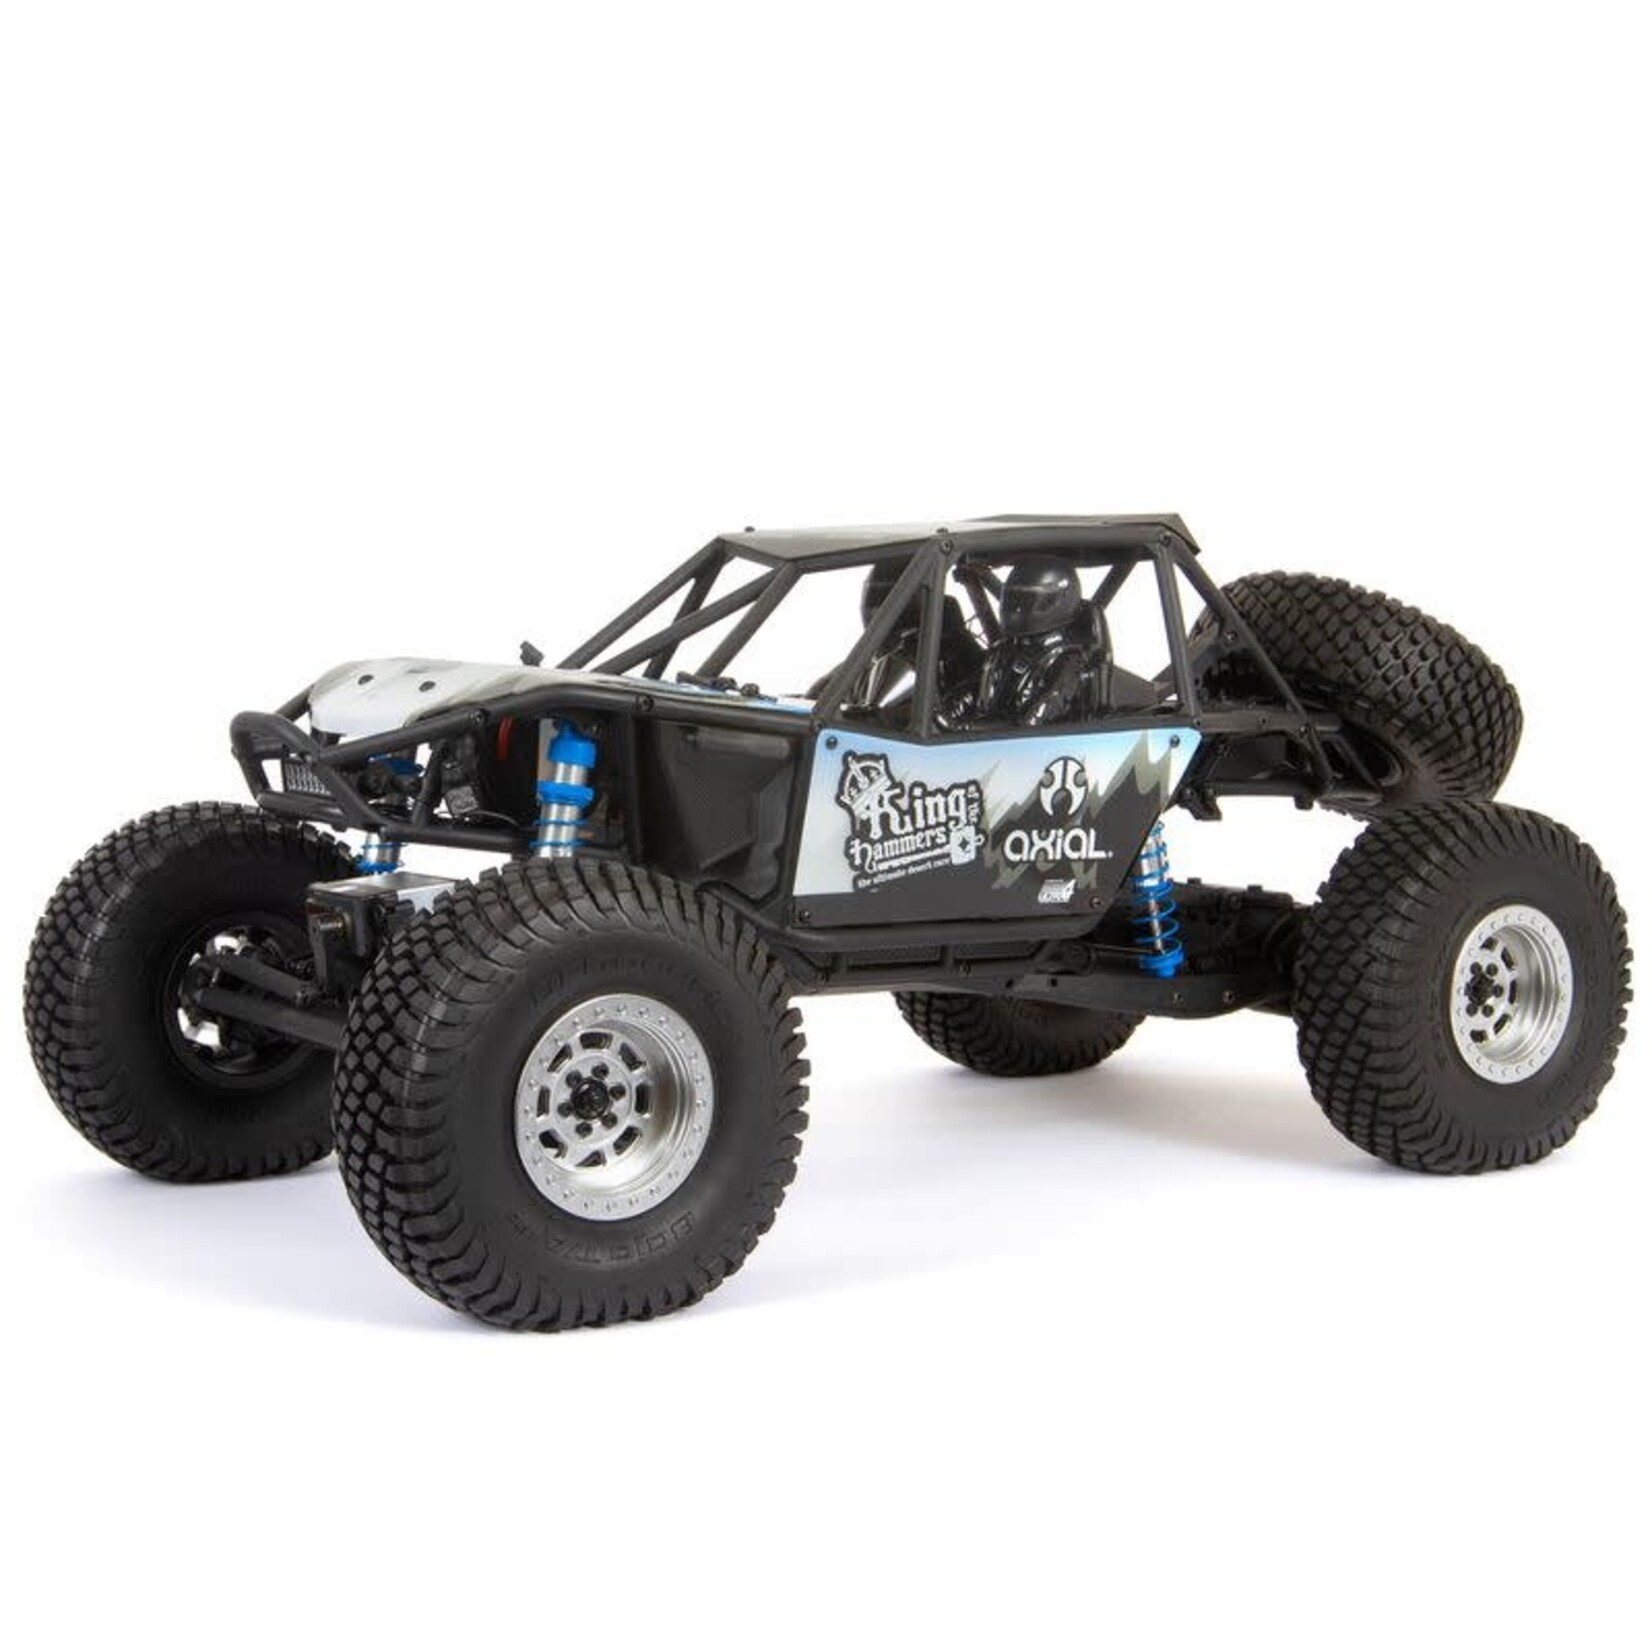 AXIAL 1/10 RR10 Bomber KOH Limited Edition 4WD RTR